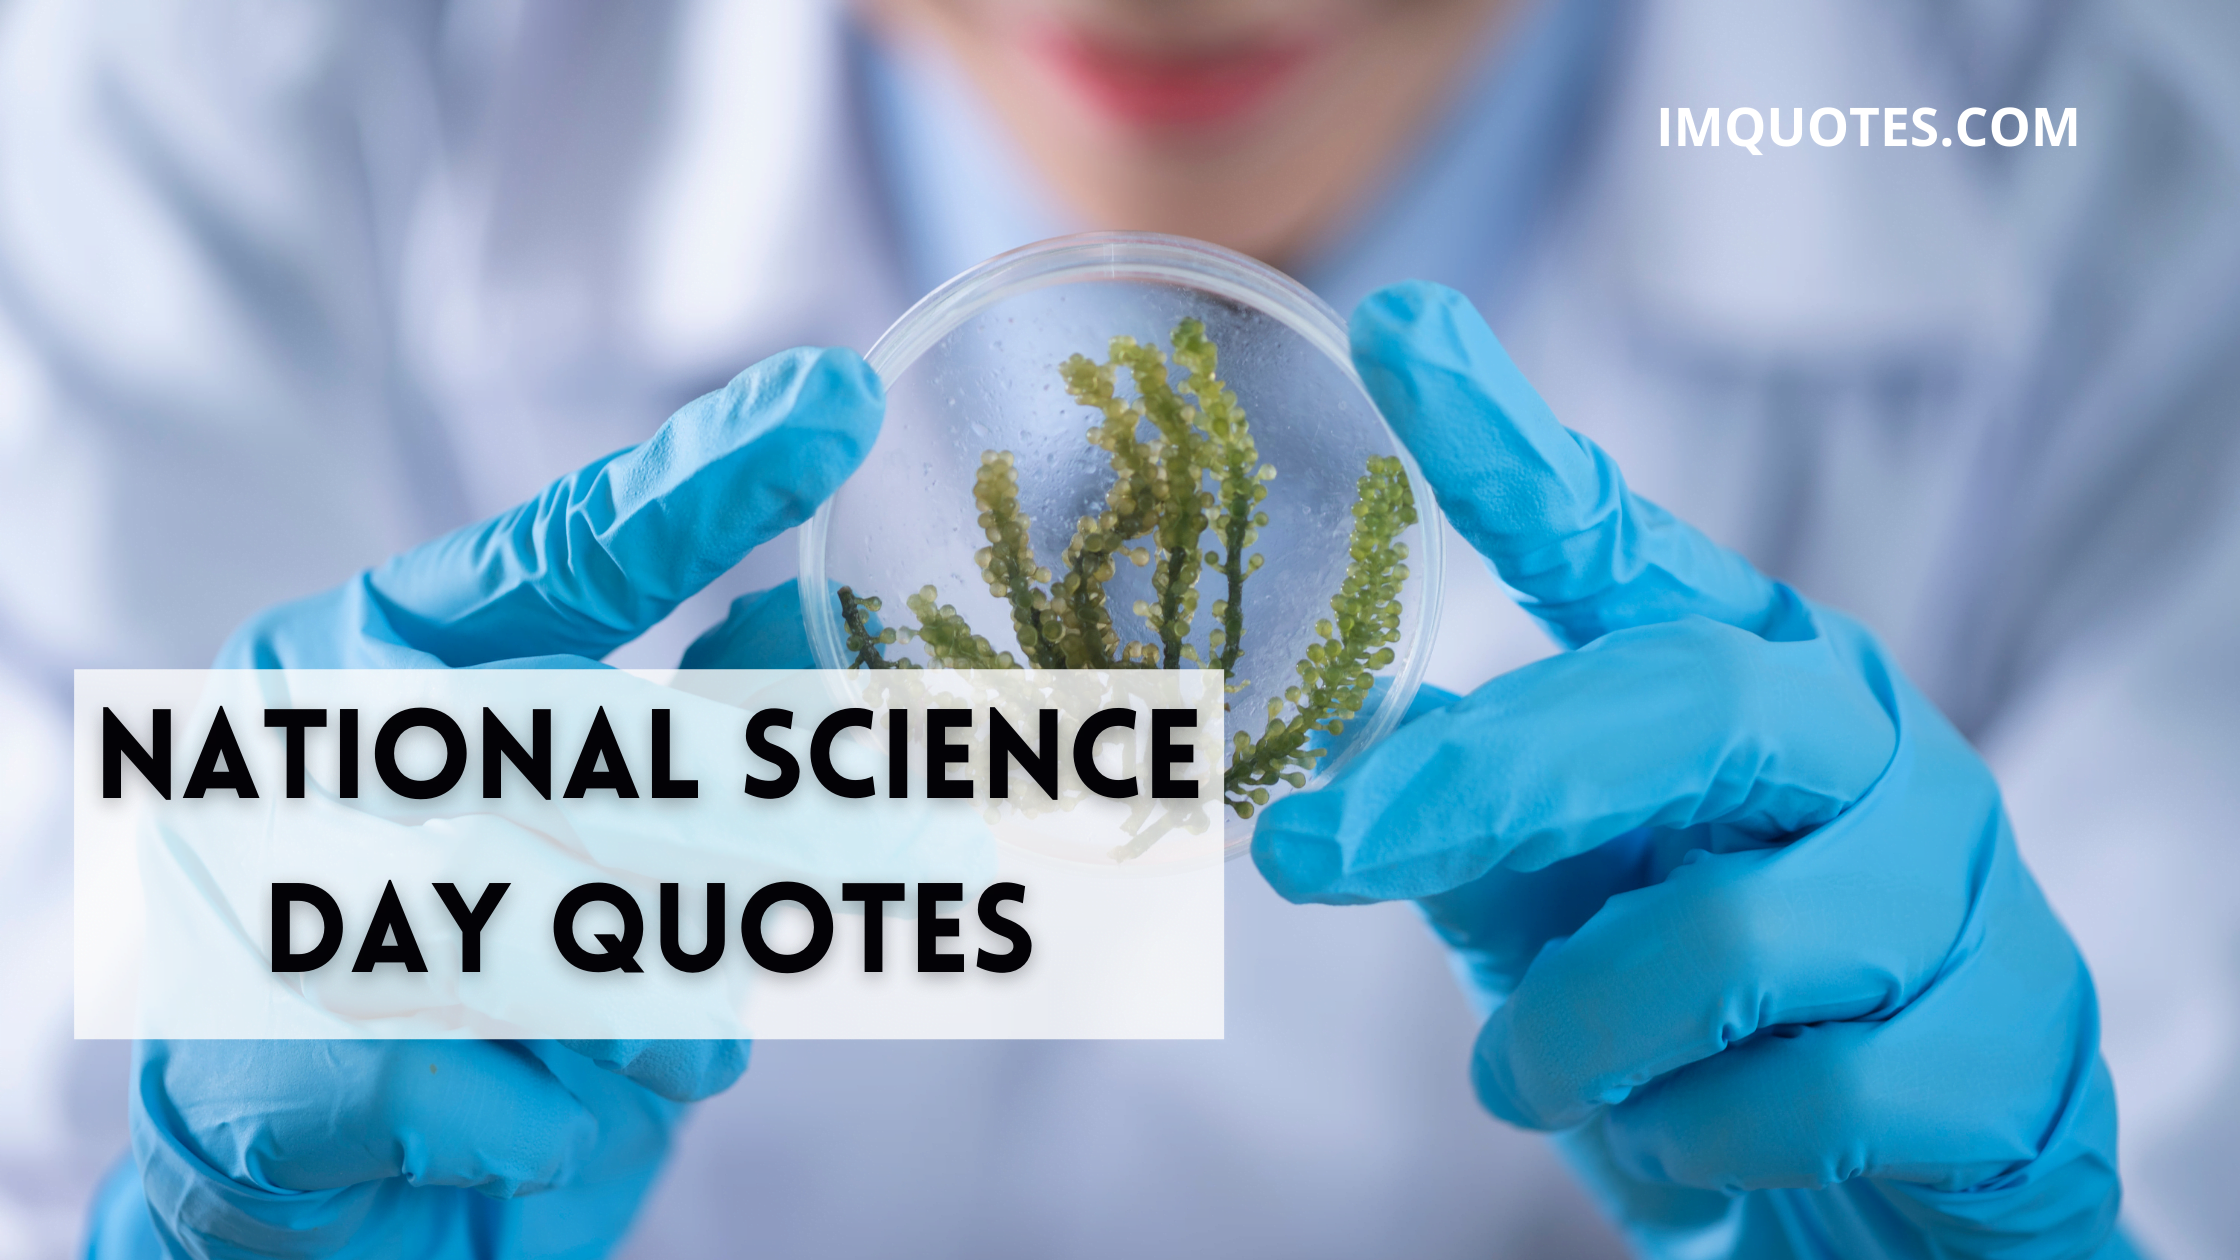 National Science Day Quotes1